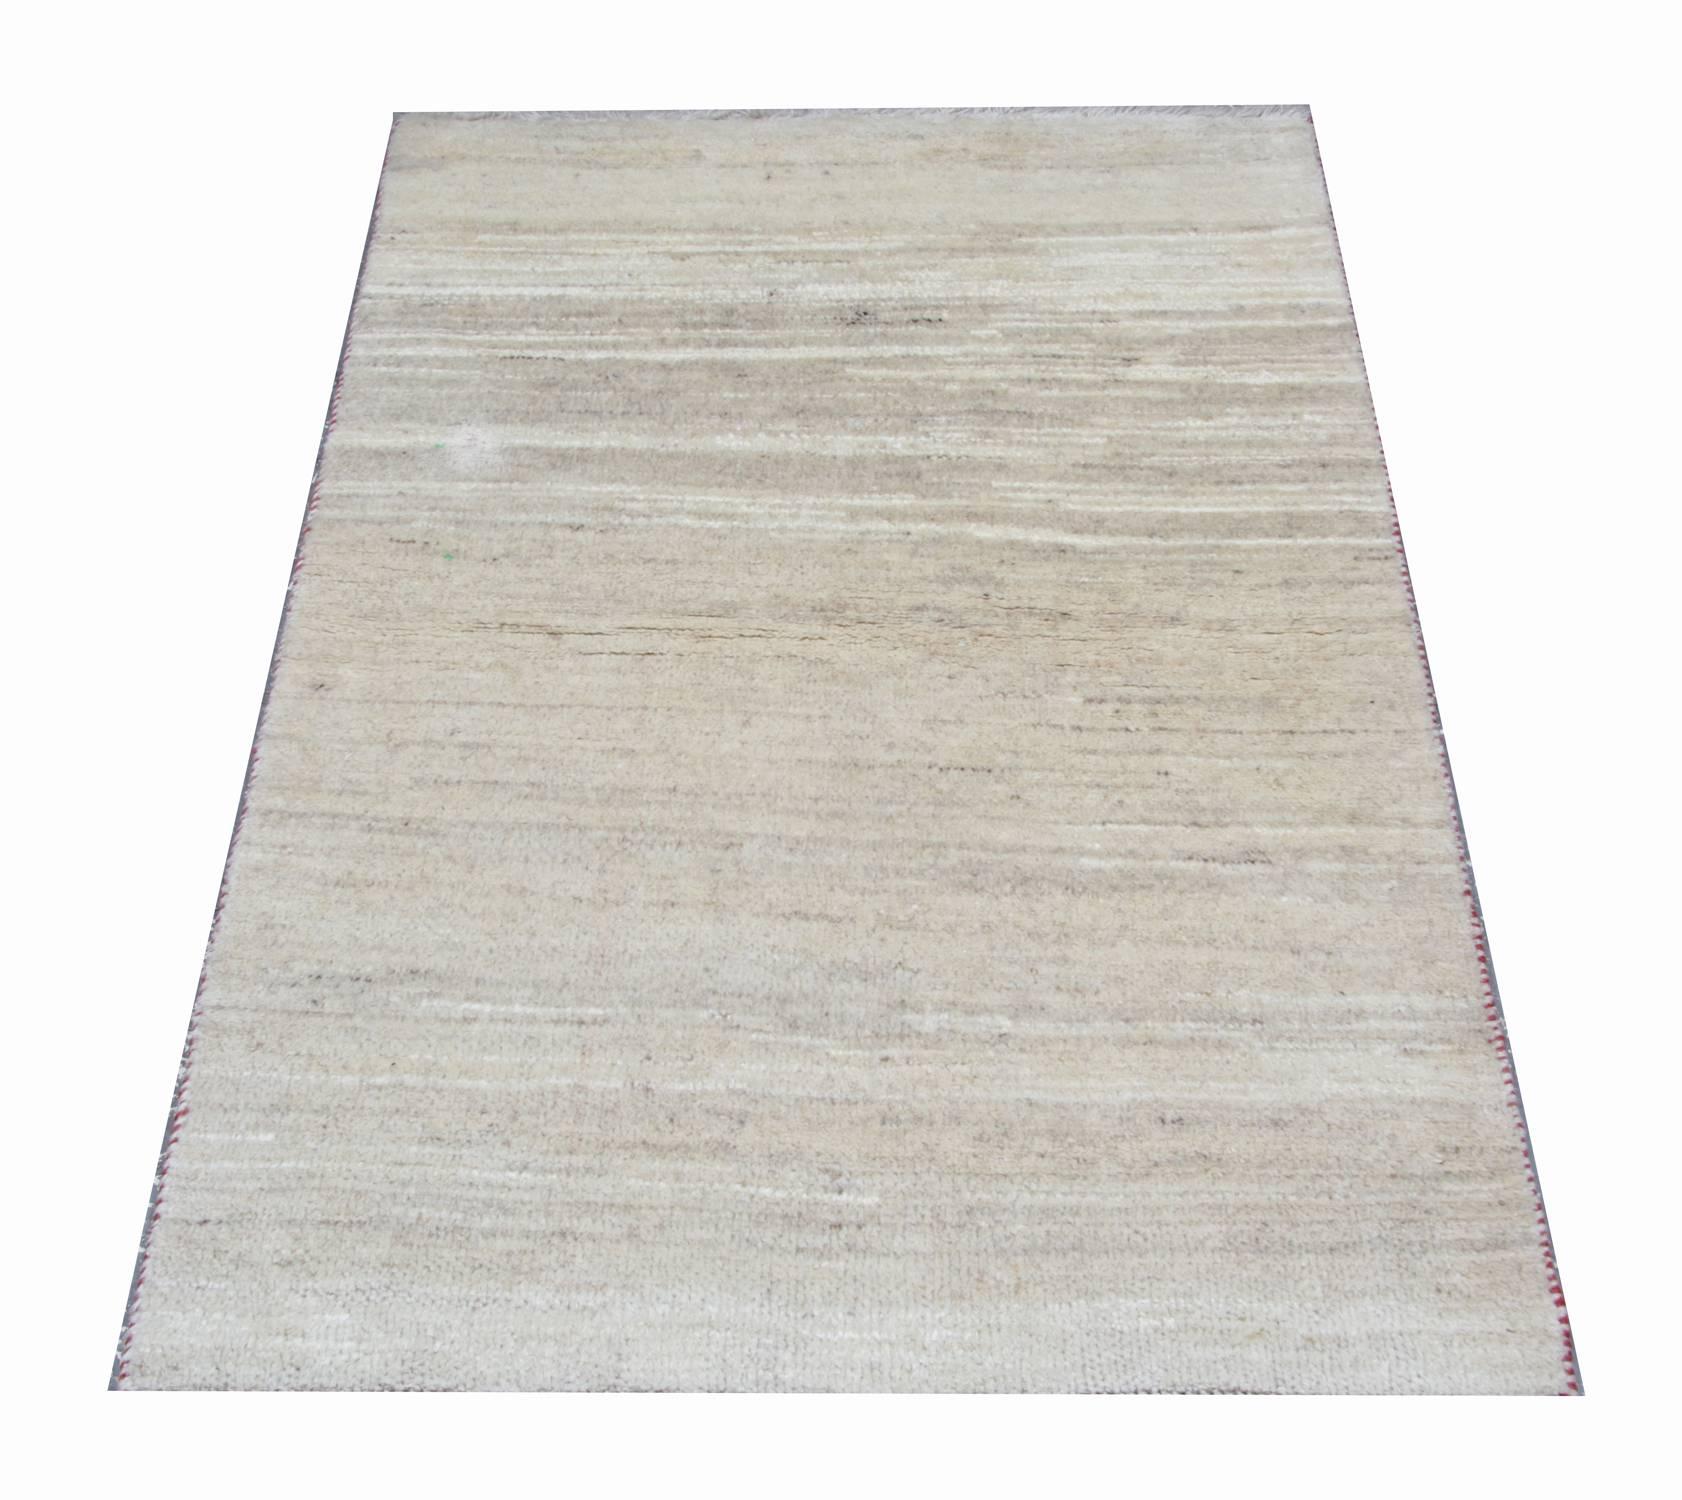 This rustic wool rug features a muted cream pallet woven in a gradient design. Simple yet sophisticated, this tasteful rug is sure to uplift any room. This rug would make a perfect addition to any home. Suitable for both modern and traditional